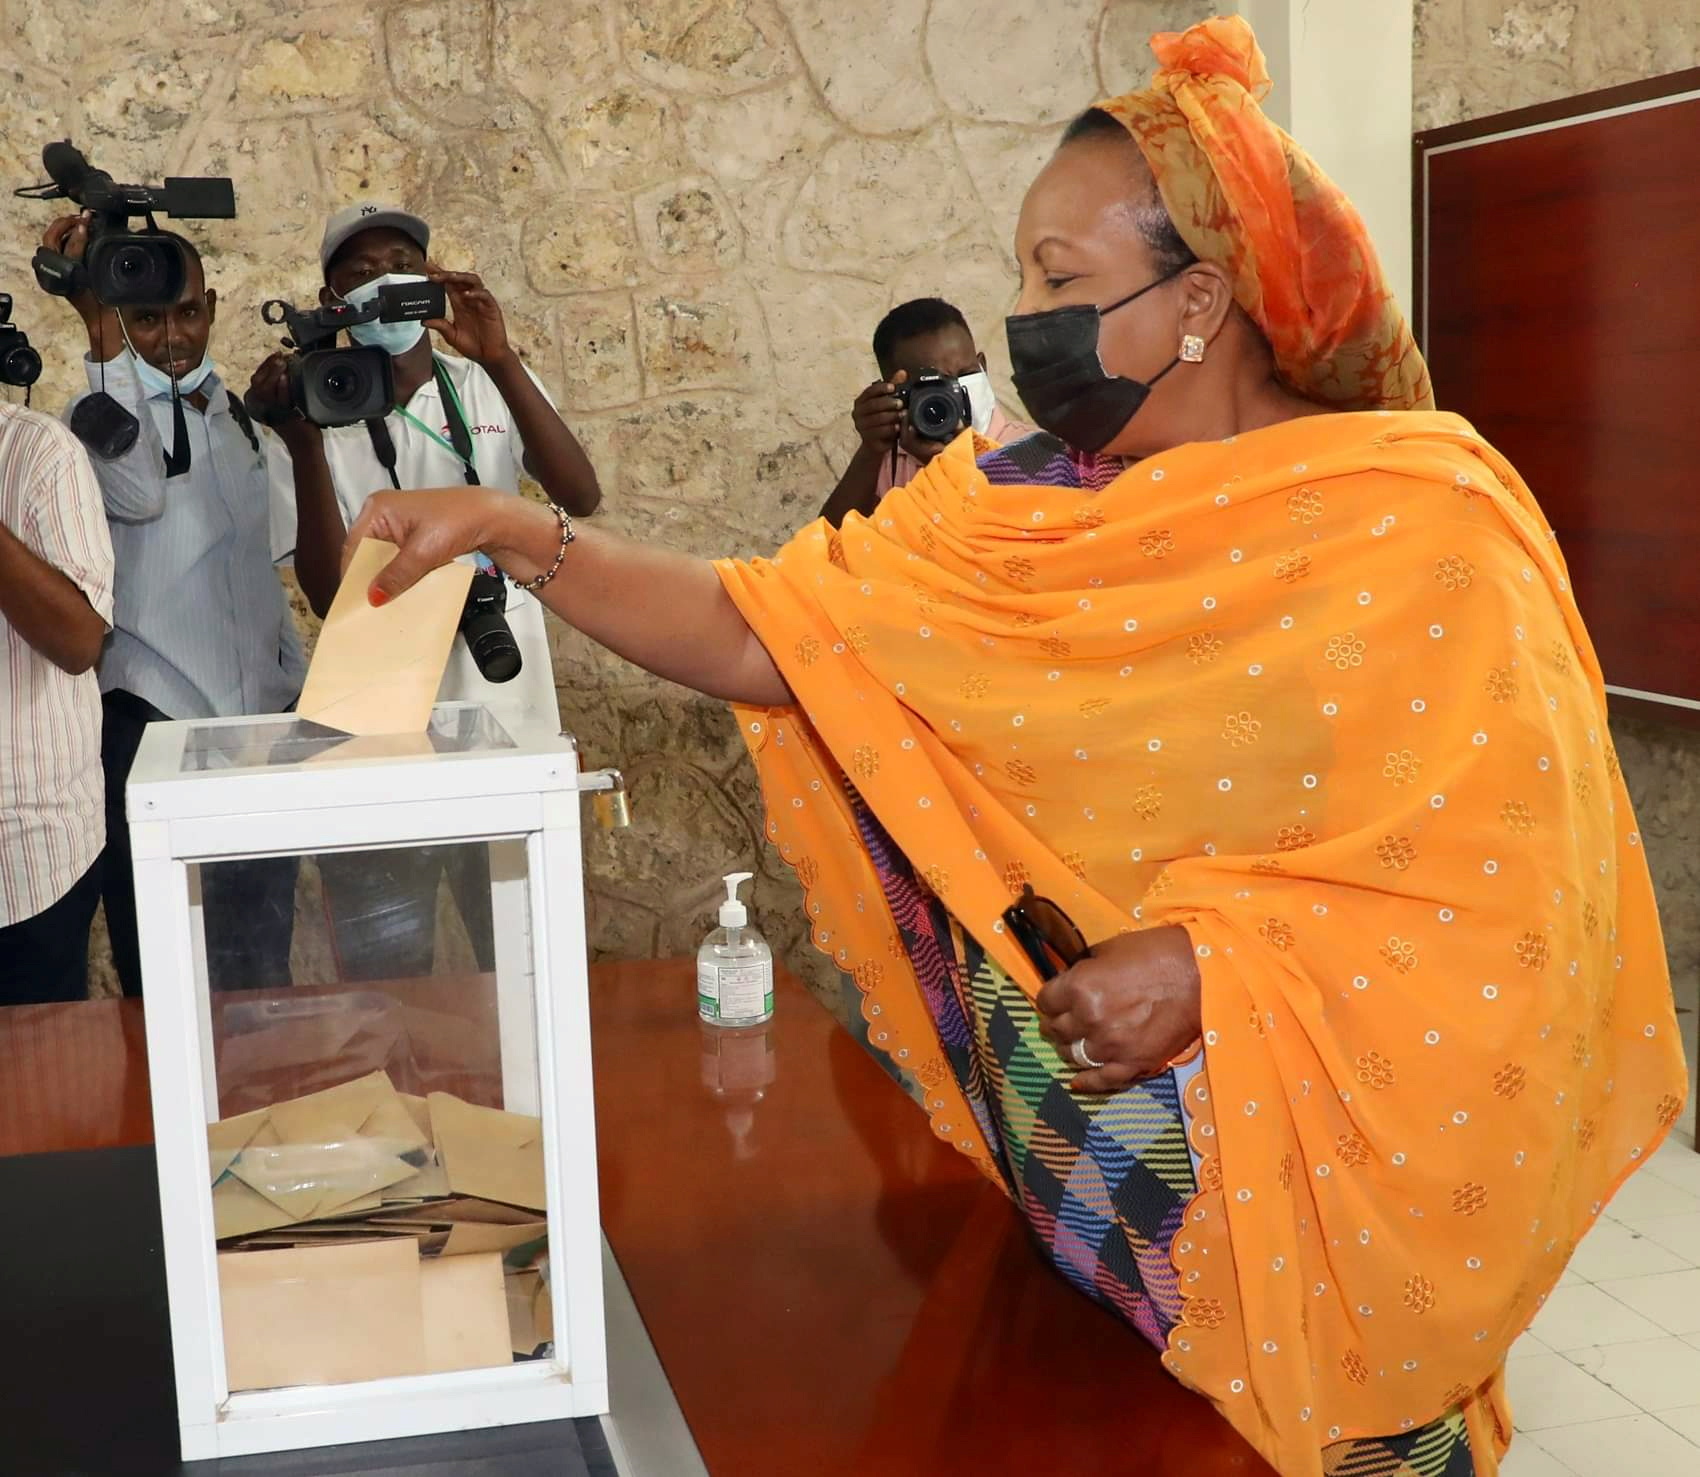 Djibouti's first lady Kadra Mahamoud Haid casts her ballot during the presidential elections at the Ras-Dika district polling centre in Djibouti, April 9, 2021. REUTERS/Abdourahim Arteh